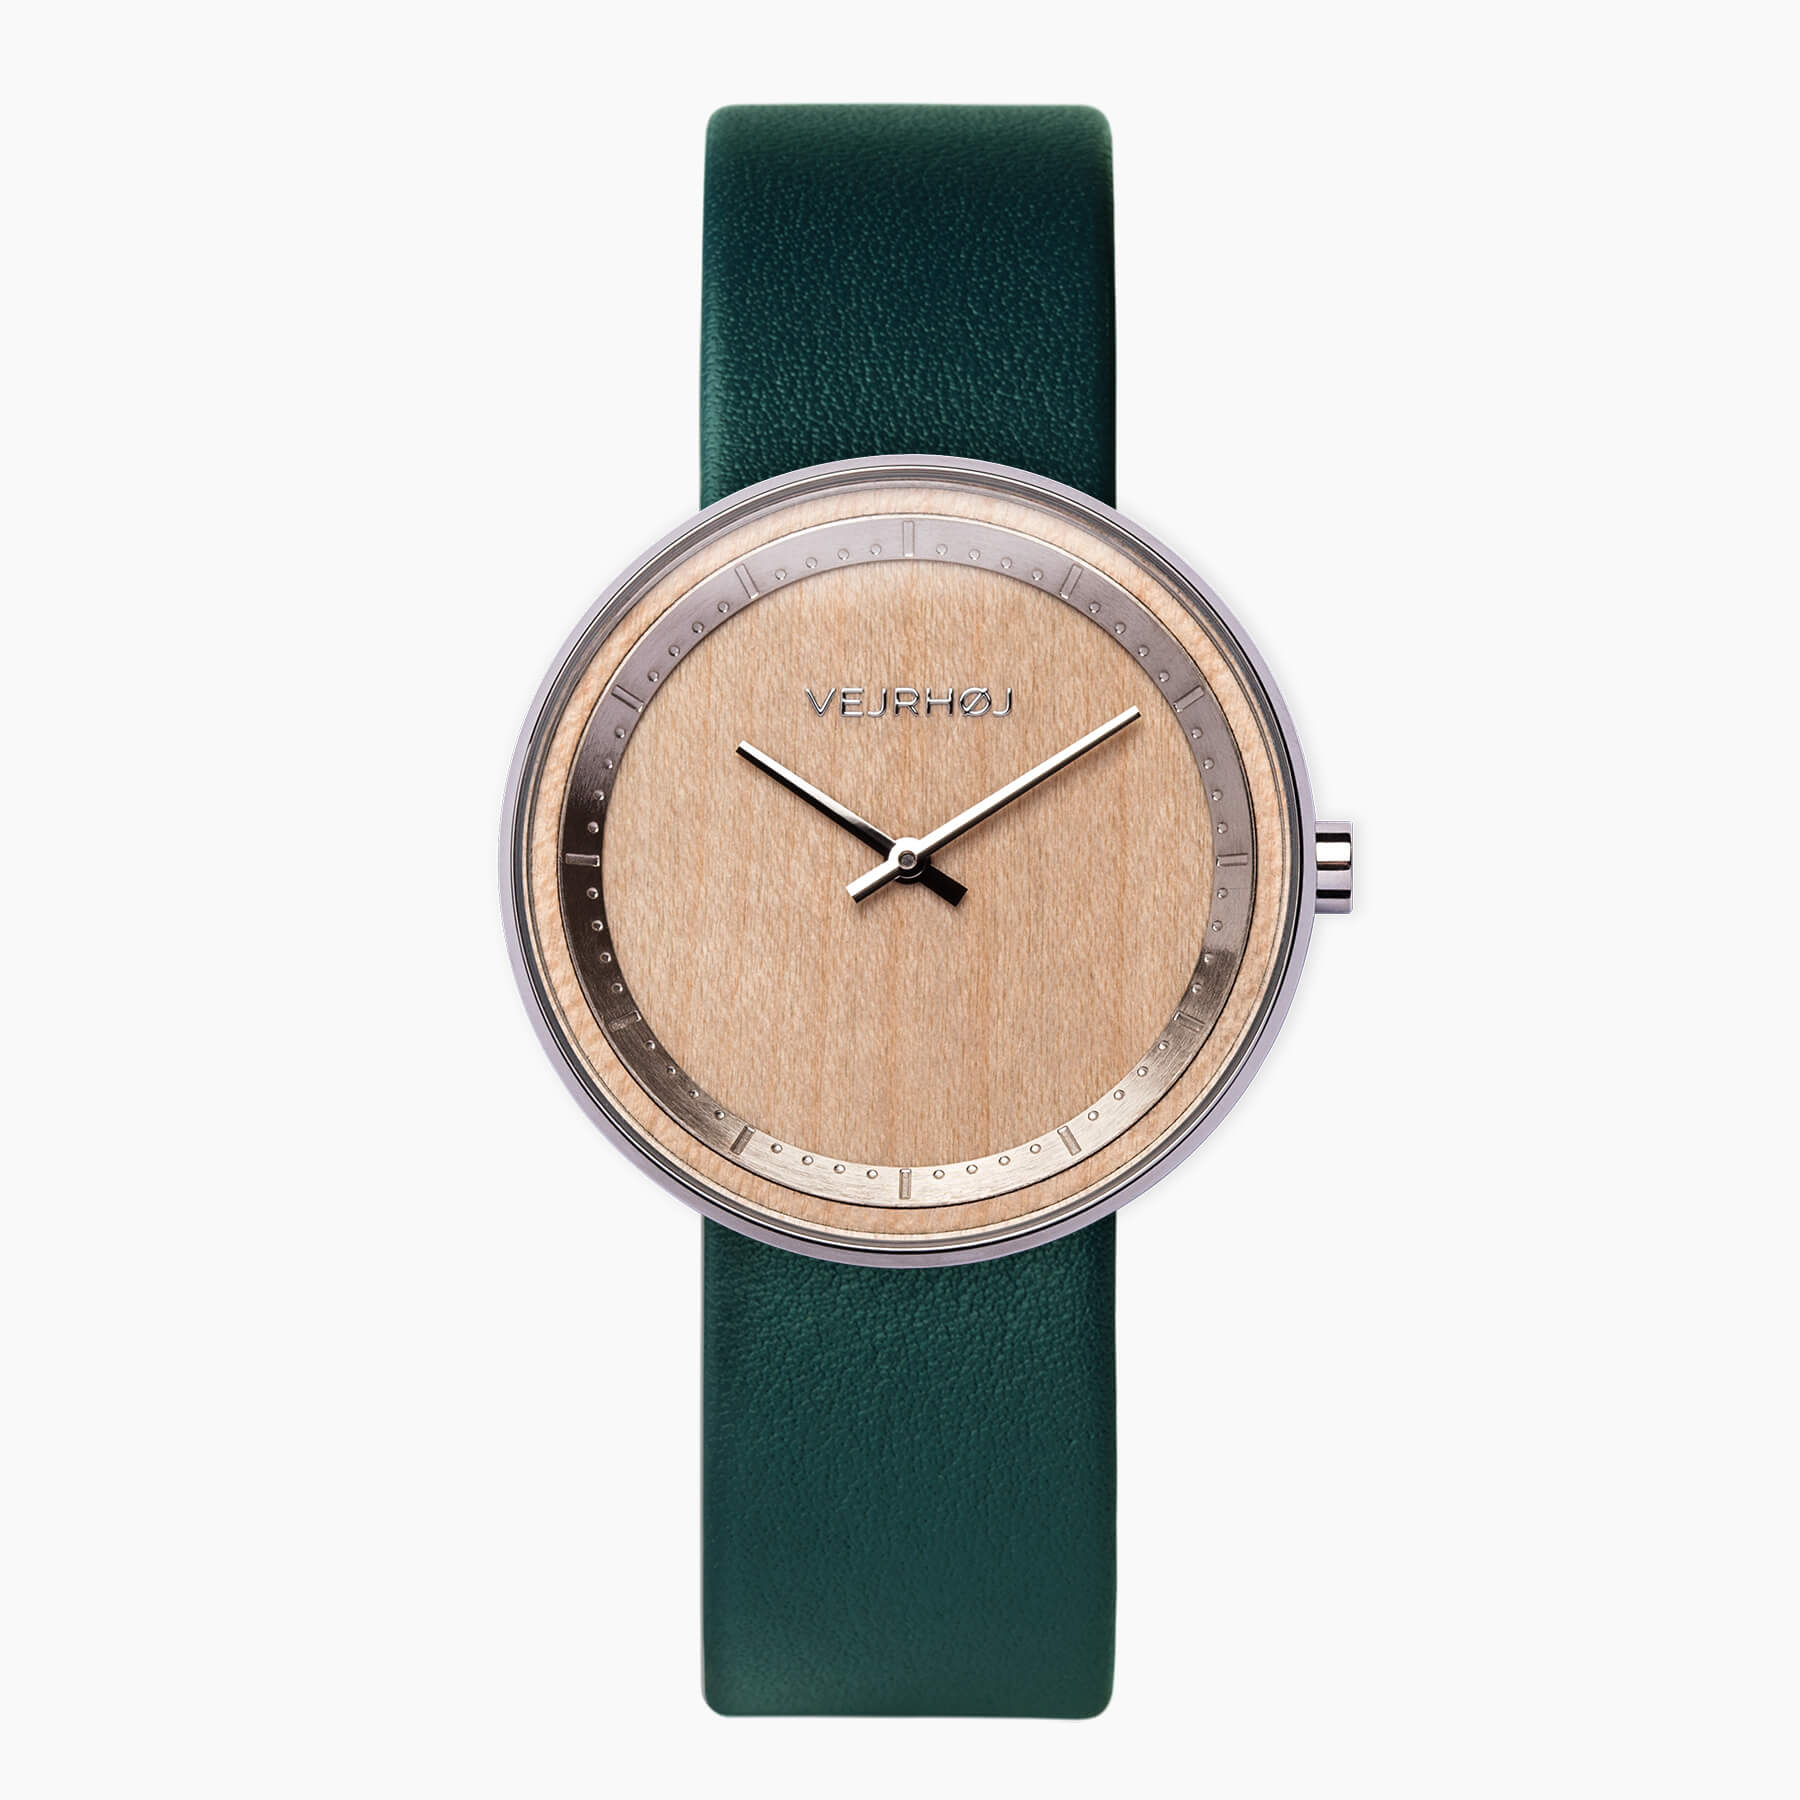 Simple, wooden watch with steel casing and green straps